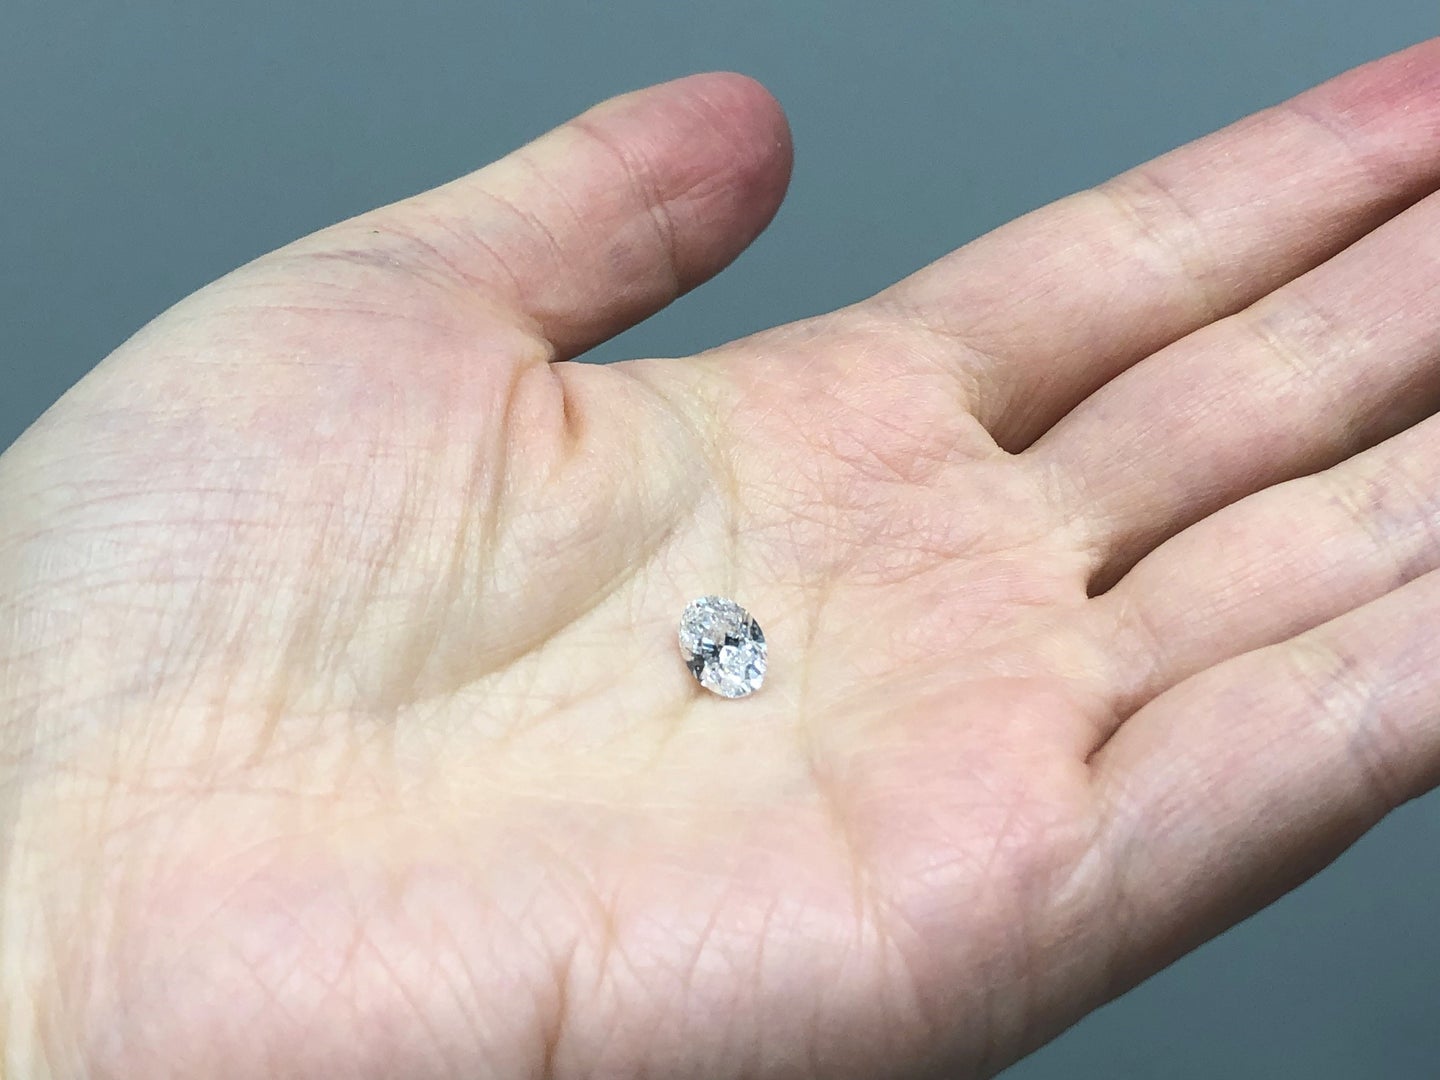 A 1.5 carat diamond unlocking the mysteries of Earth's mantle.